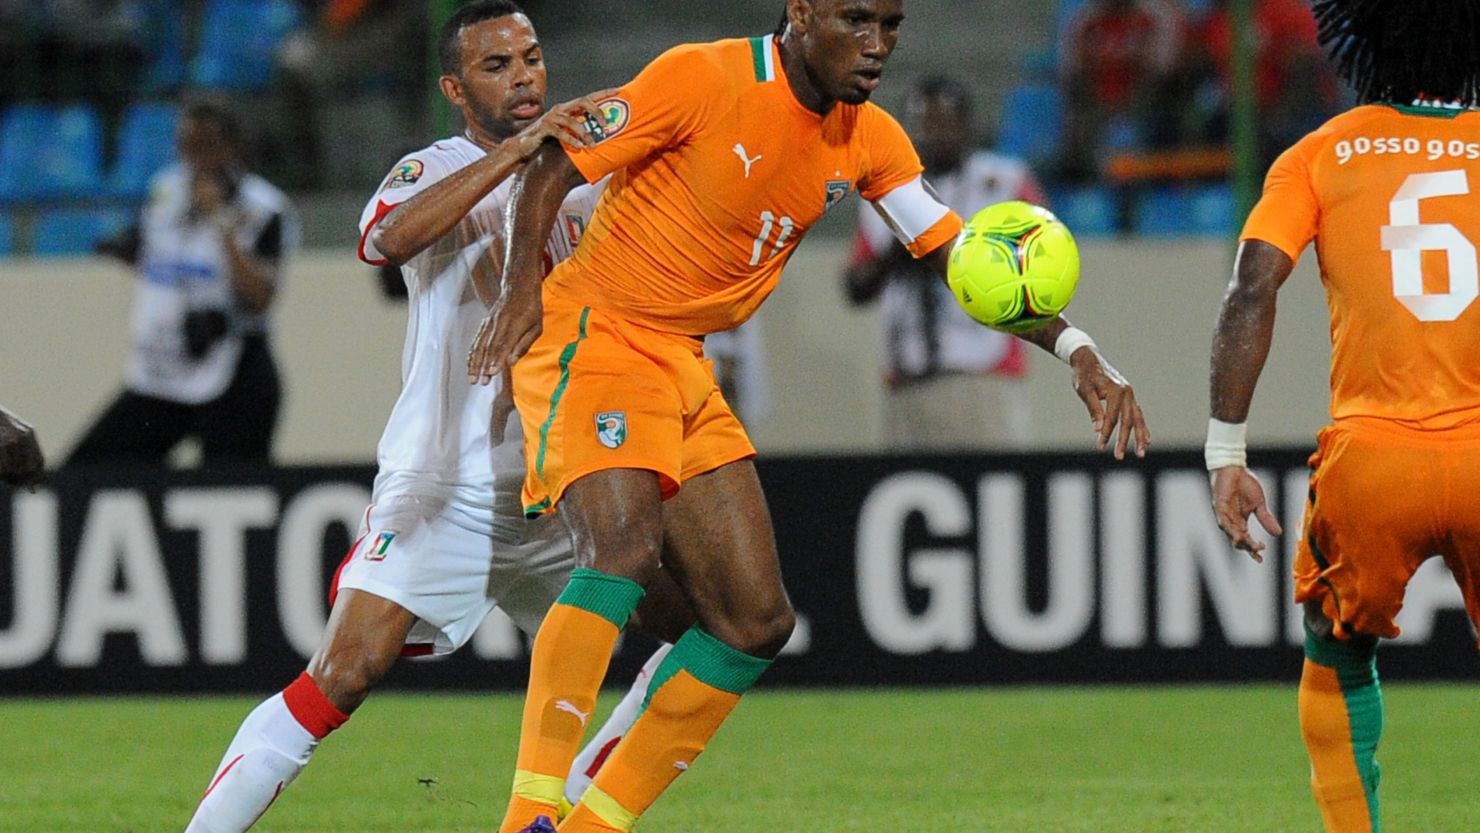 Chelsea star Didier Drogba scored twice in Ivory Coast's quarterfinal win over co-hosts Equatorial Guinea on Saturday.